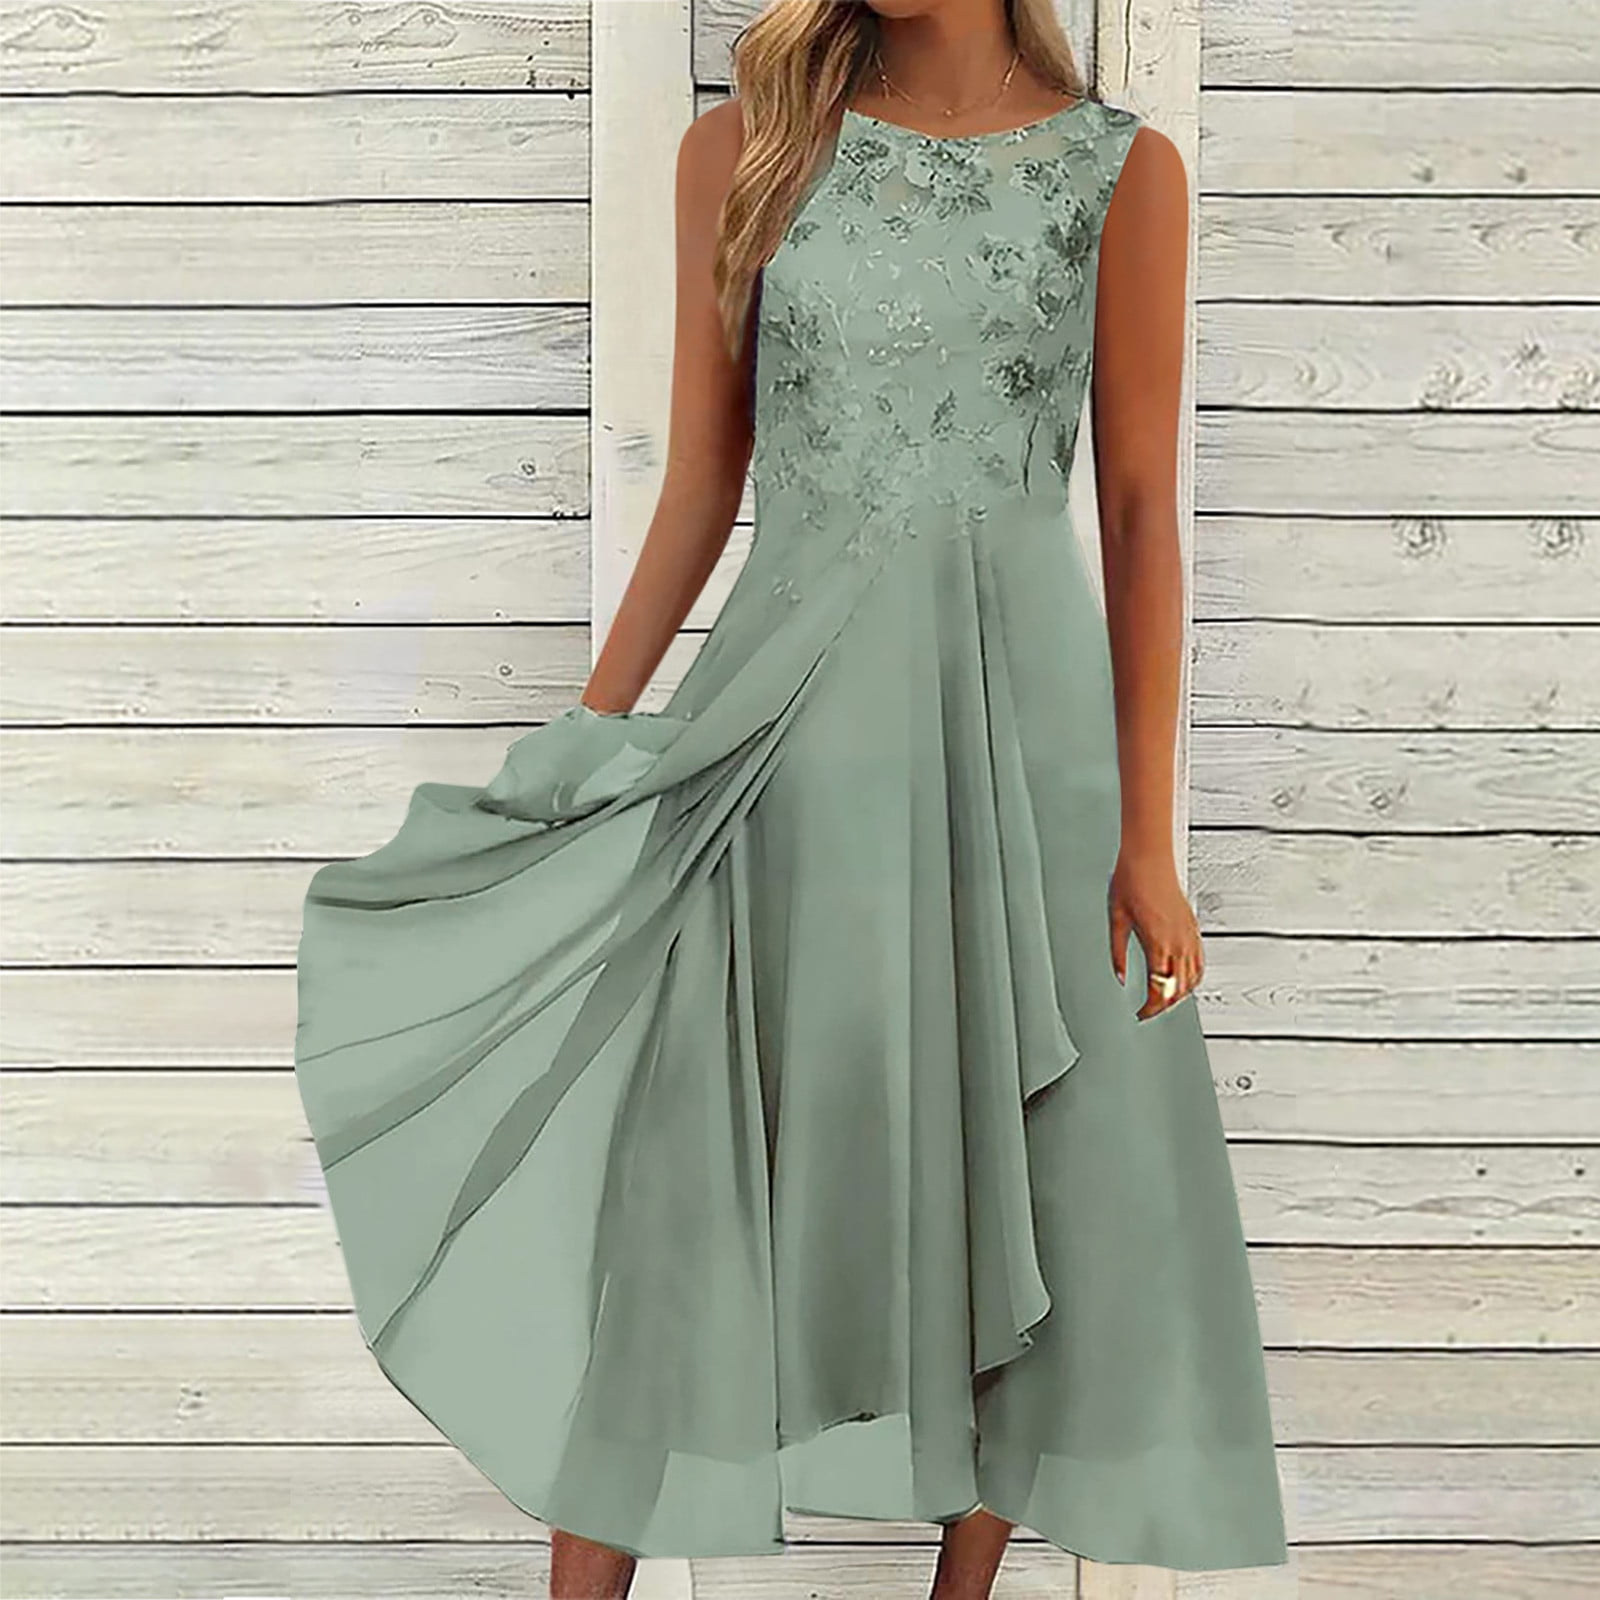 Finelylove Dresses That Hide Belly Fat Active Dress A-line Long Sleeveless  Solid Mint Green XL